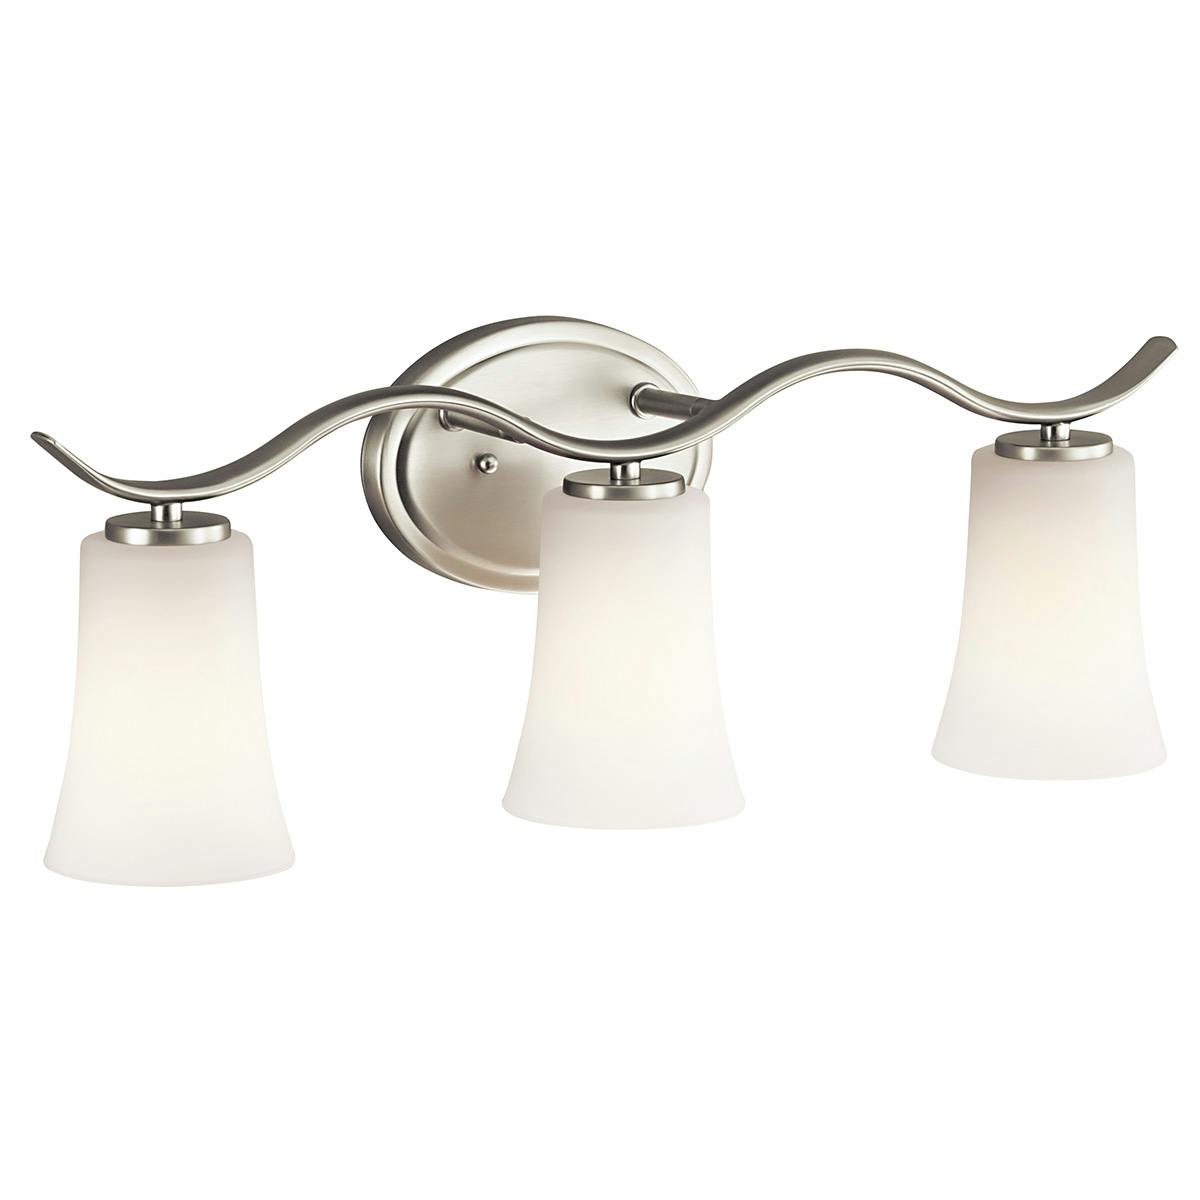 The Armida 3 Light Vanity Light in Nickel facing down on a white background